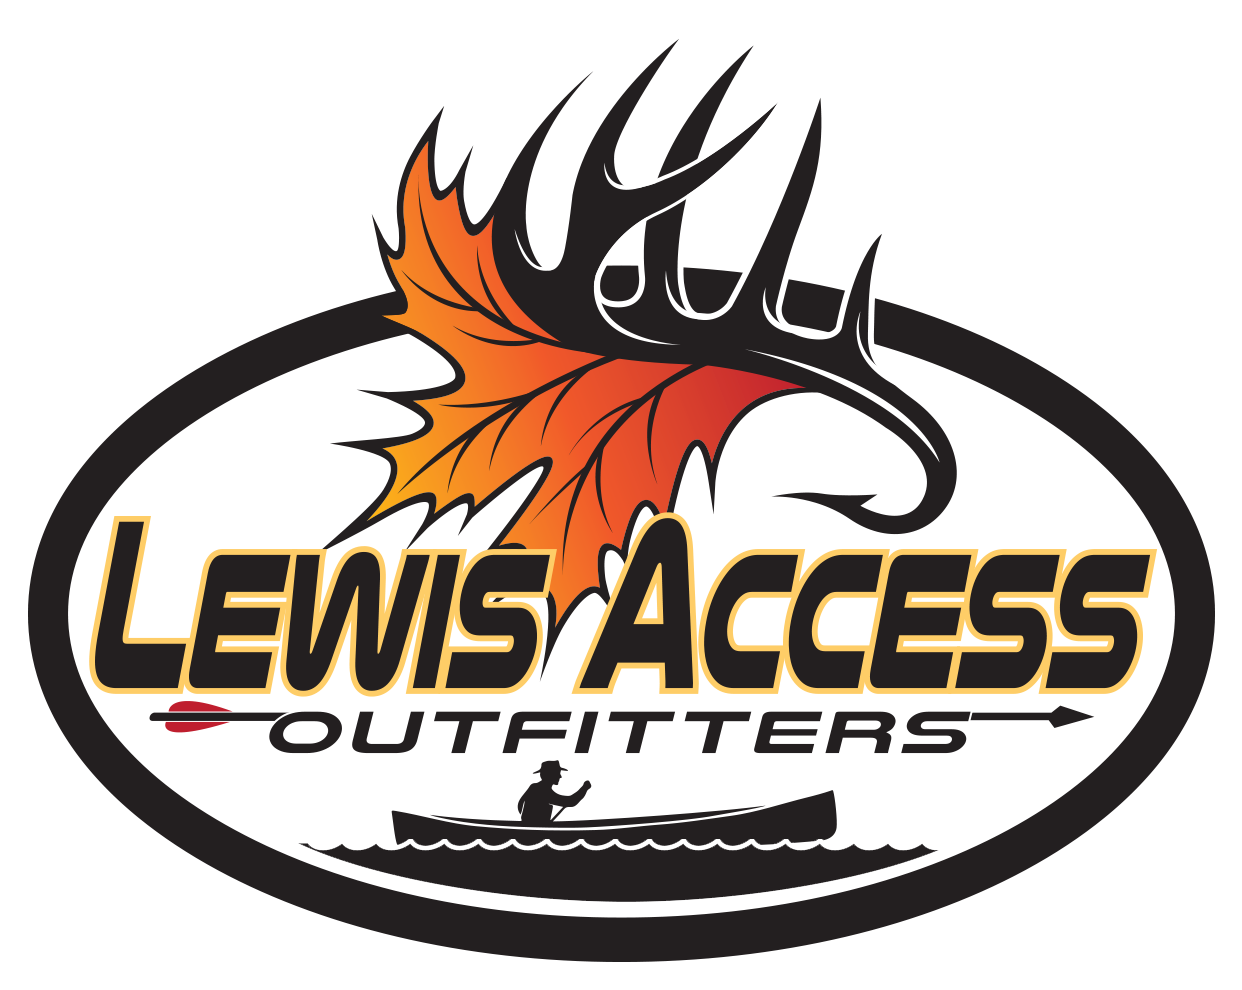 Lewis Access Outfitters